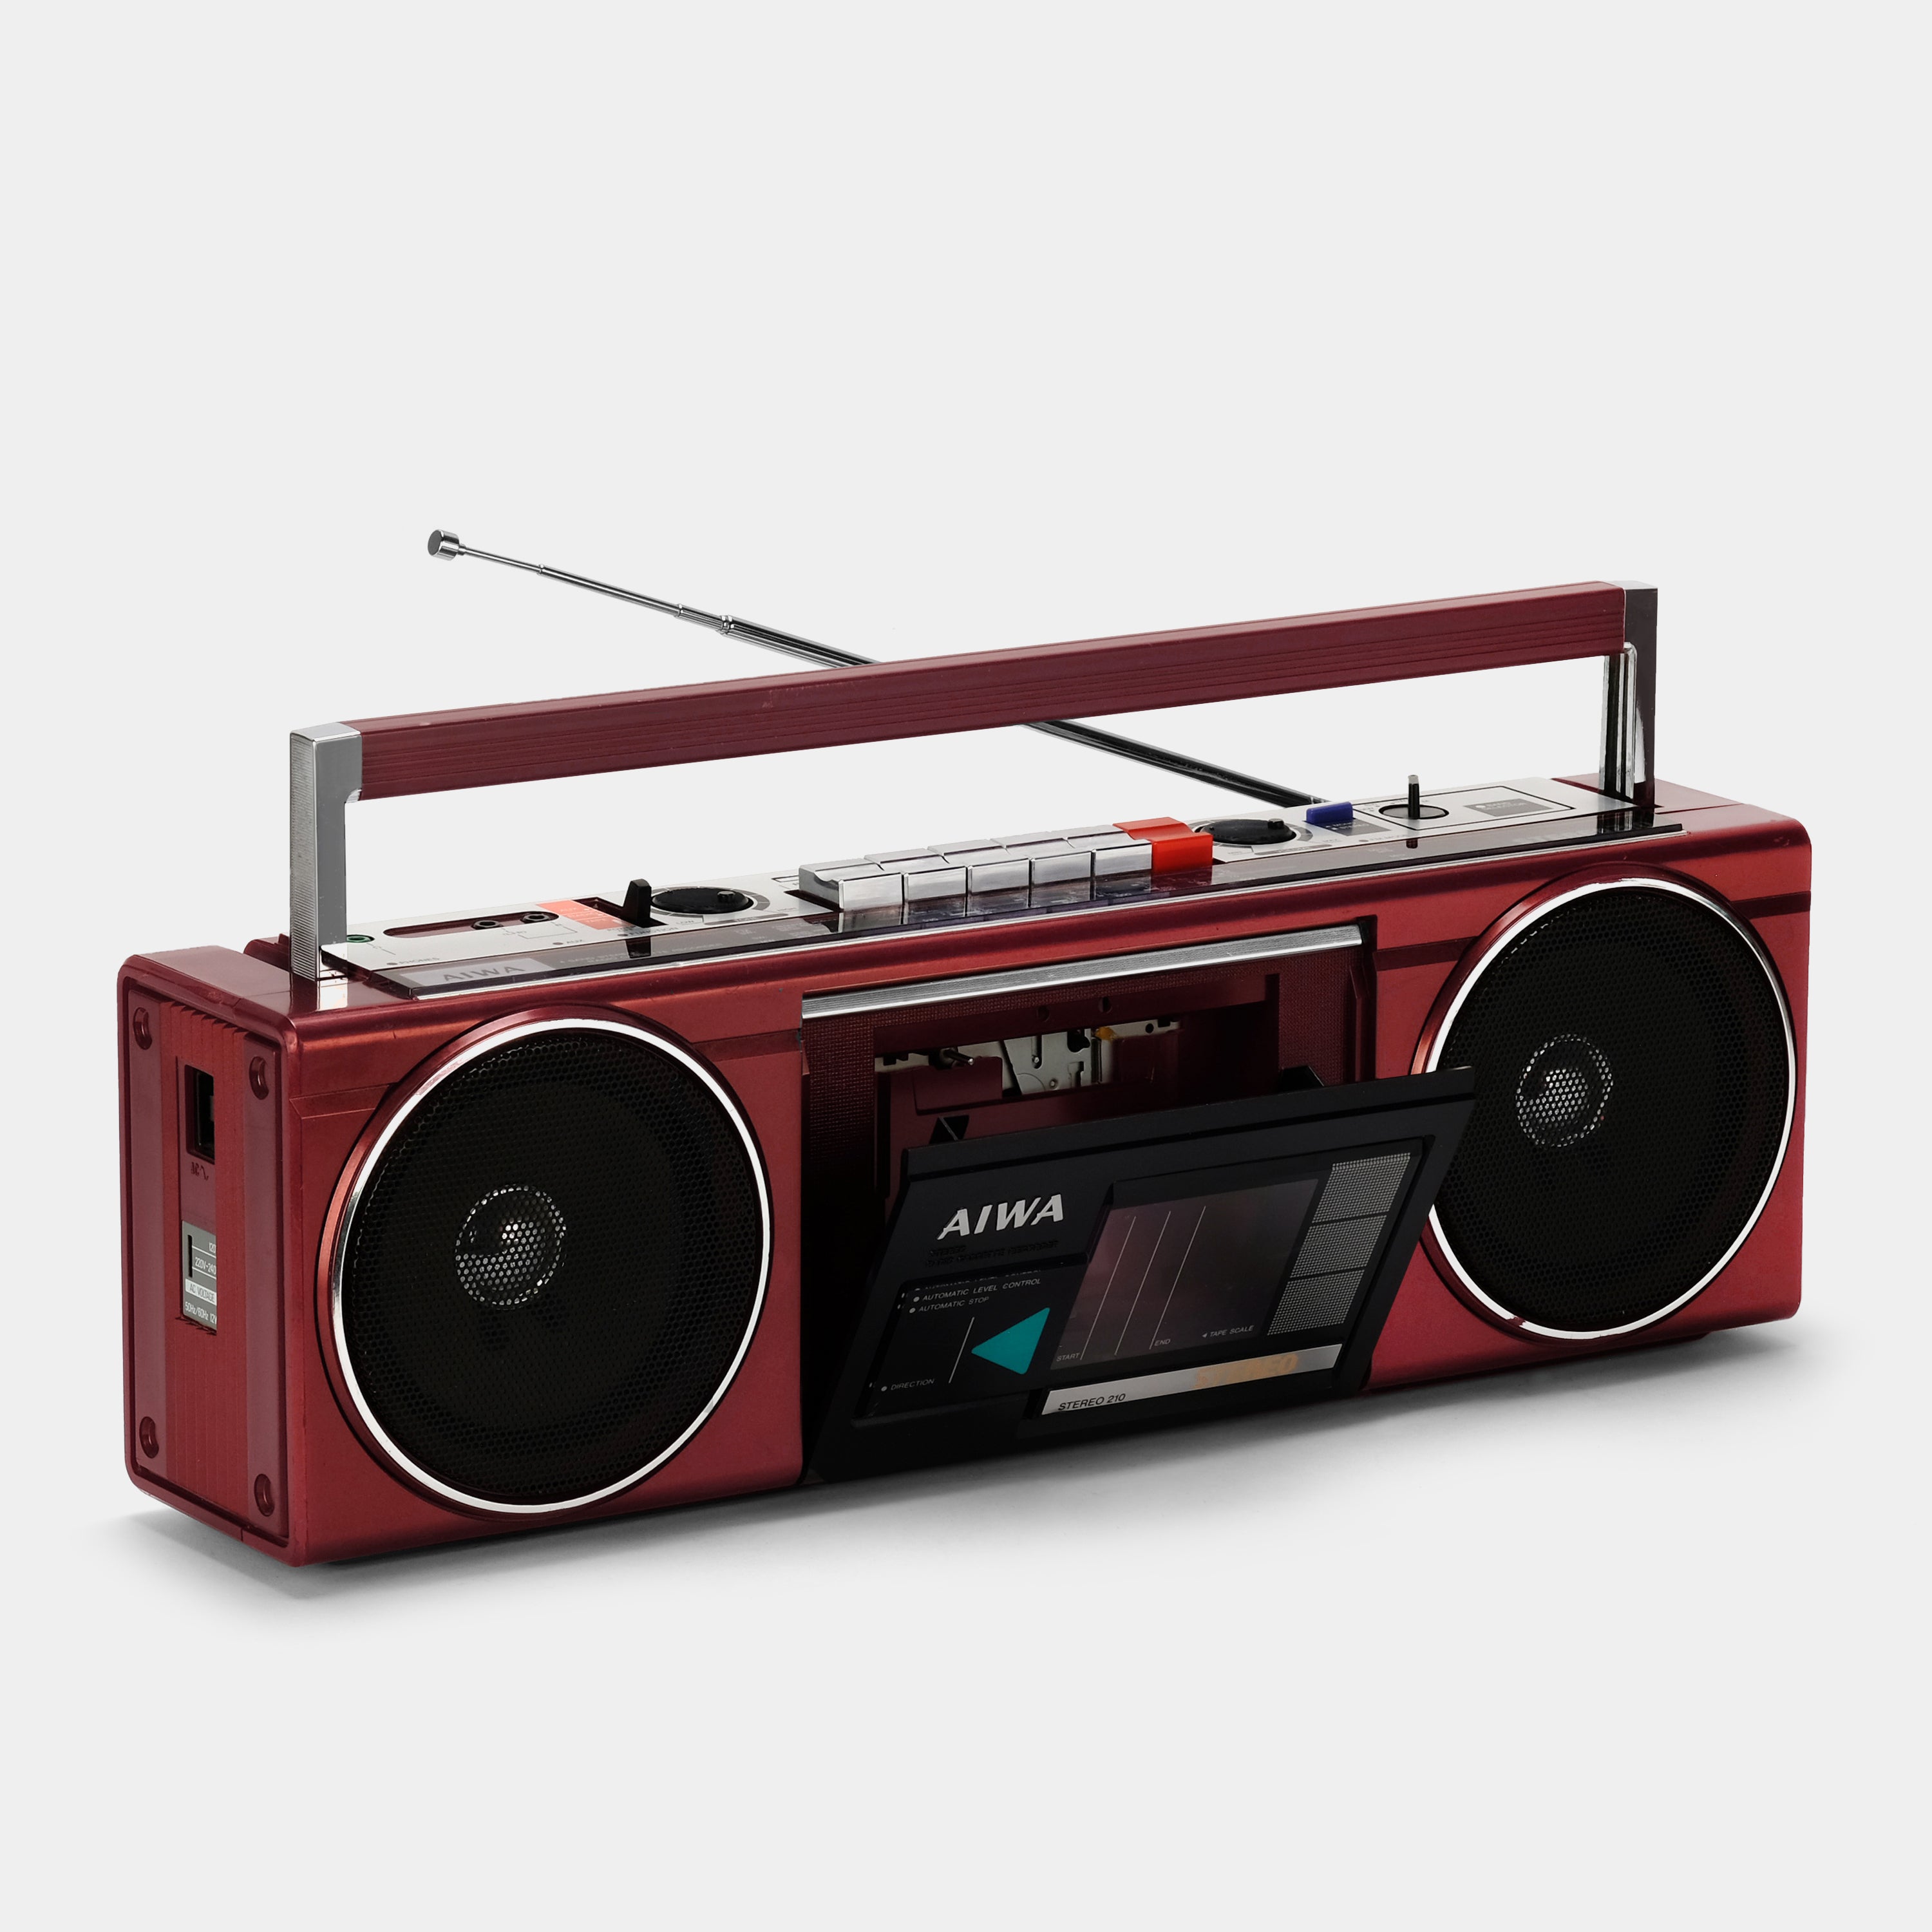 Aiwa Stereo 210 CS-210U AM/FM Red Boombox Cassette Recorder and Player